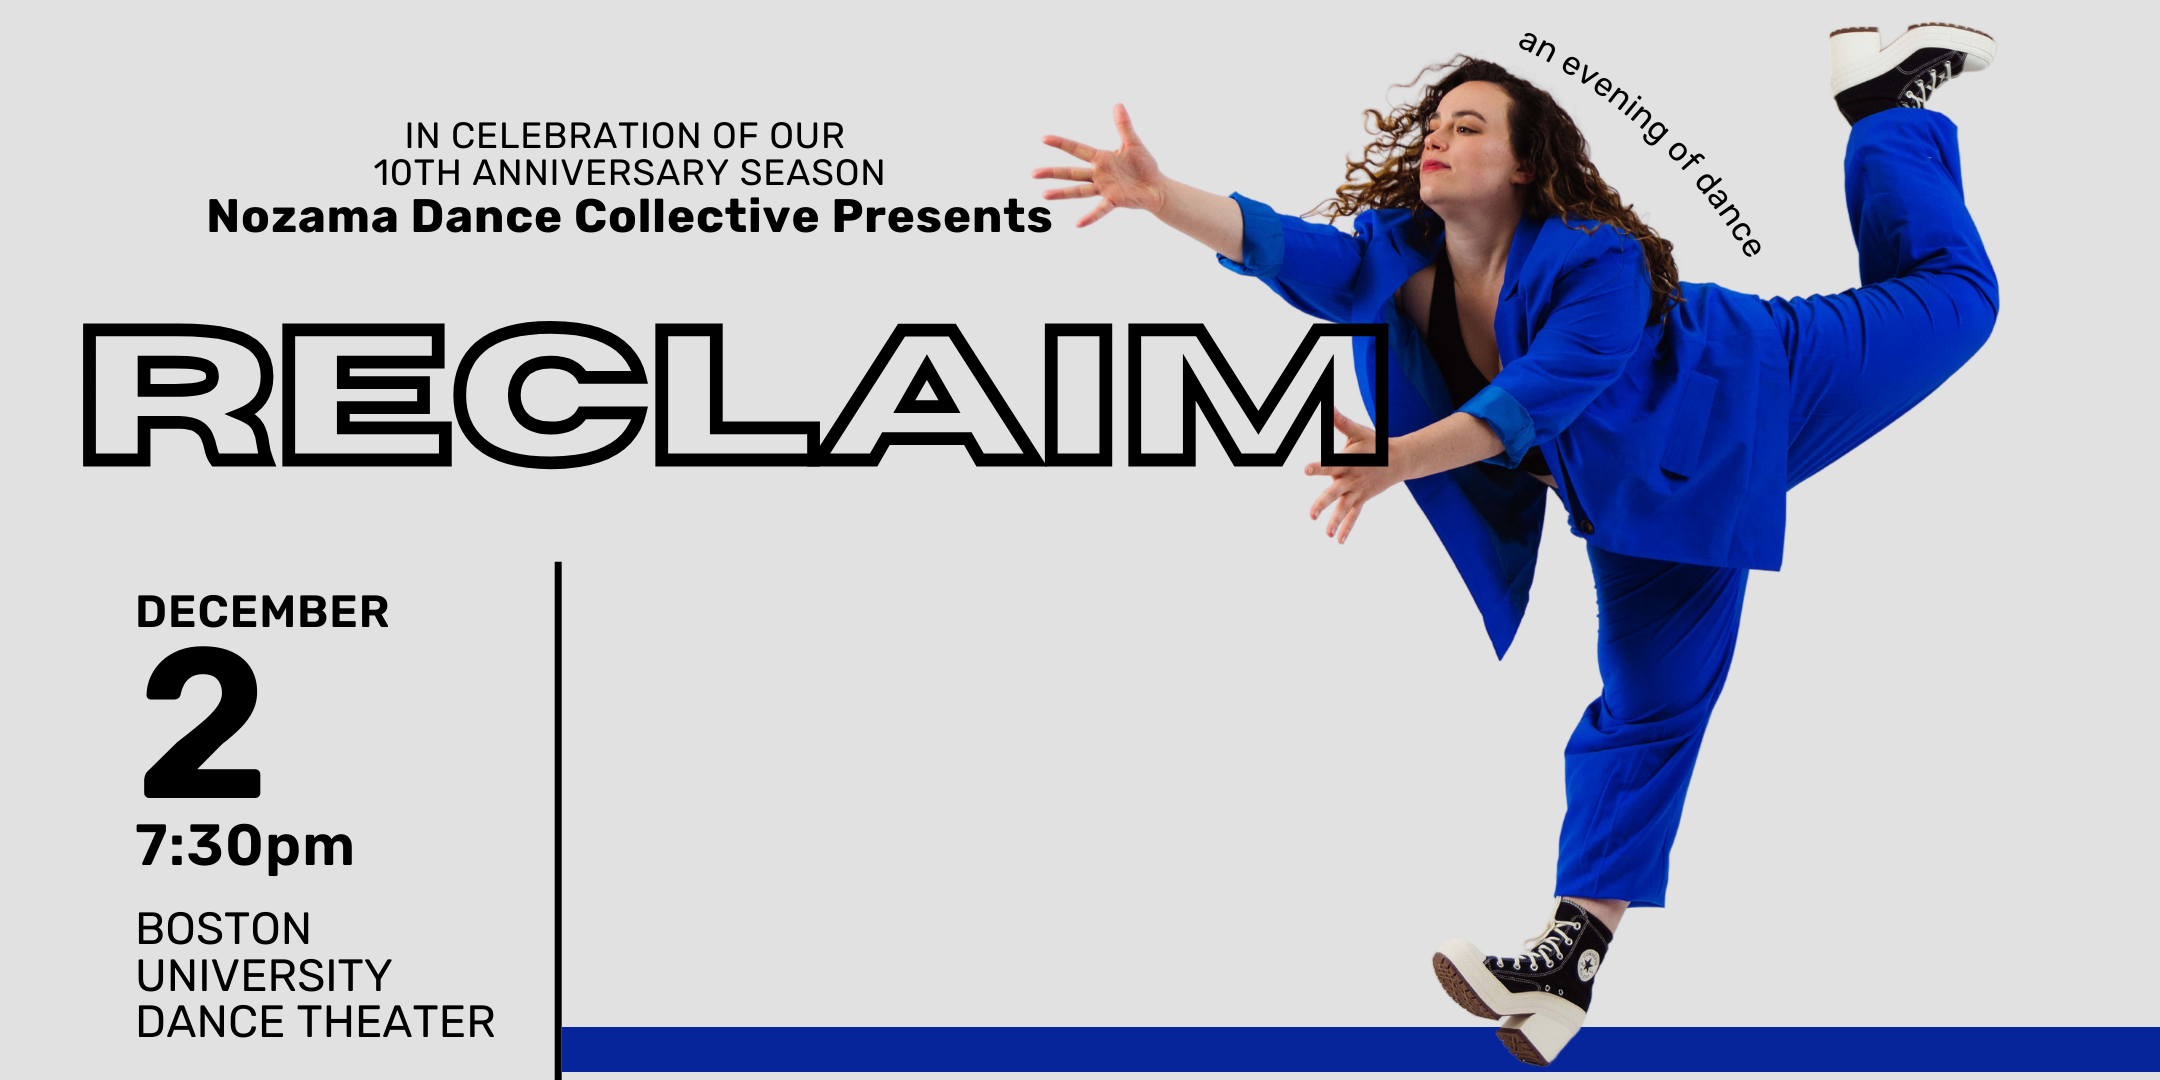 A dancers with brown curly hair in a bright blue suit and heeled Converse reaches to the left of the image with her back leg swinging up behind her. The text reads: In celebration of our 10th anniversary season Nozama Dance Collective Presents RECLAIM December 2 7:30PM Boston University Dance Theater.